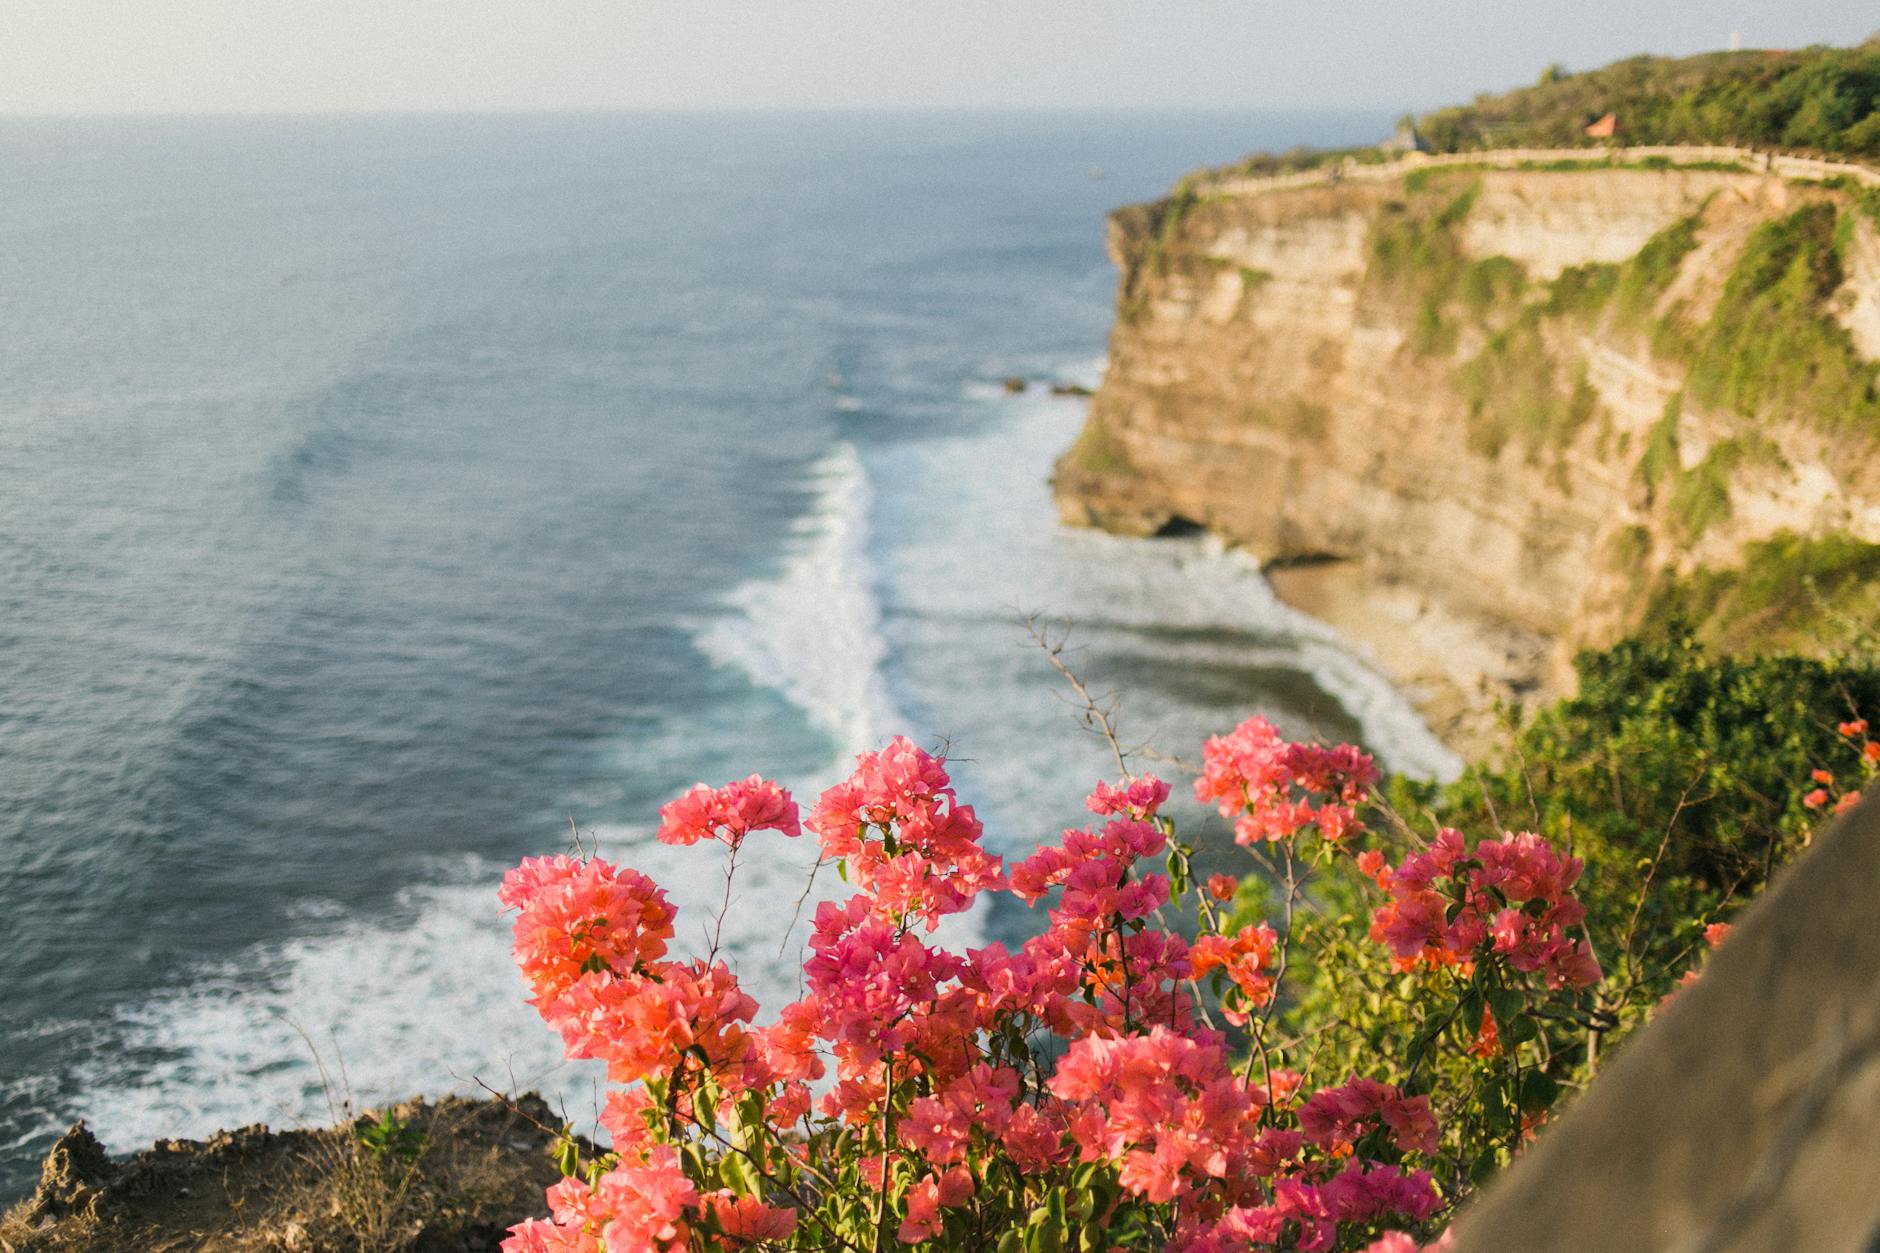 Lush greenery and vibrant delicate pink flowers on top of steep rock above wavy endless ocean under clear sky